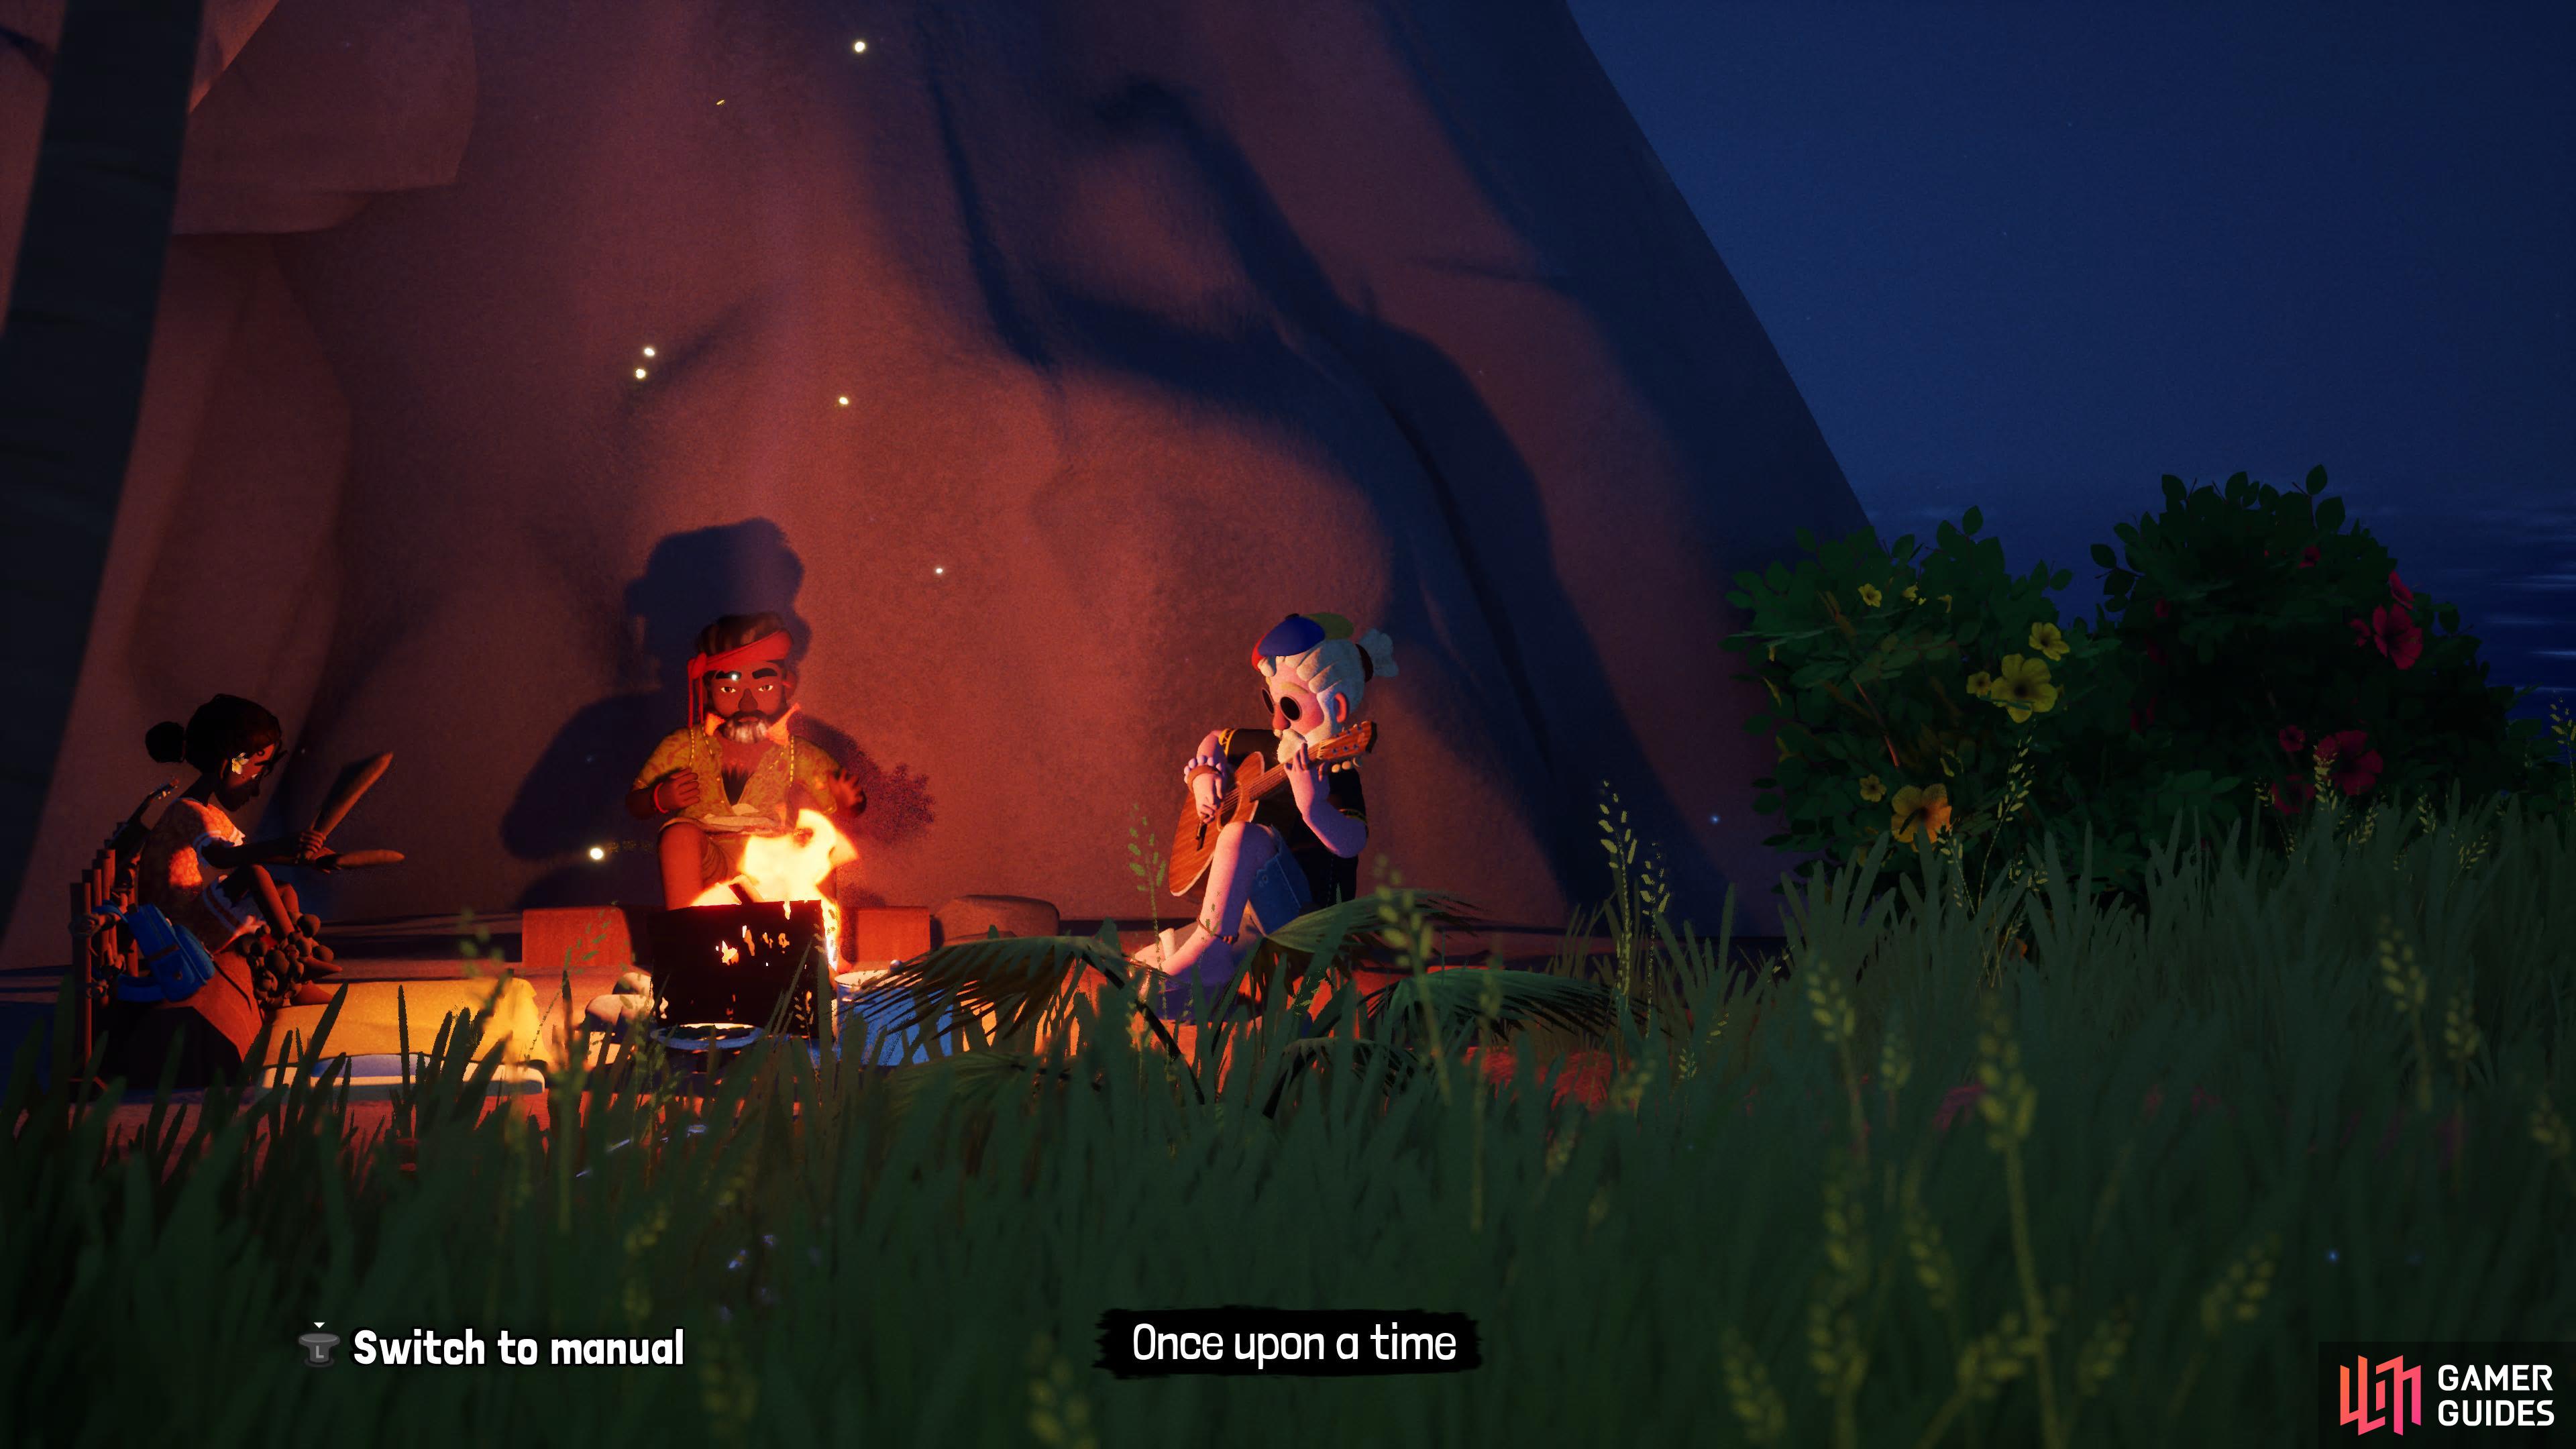 The final music sequence of the game with Tchia, her Father, and Tre.